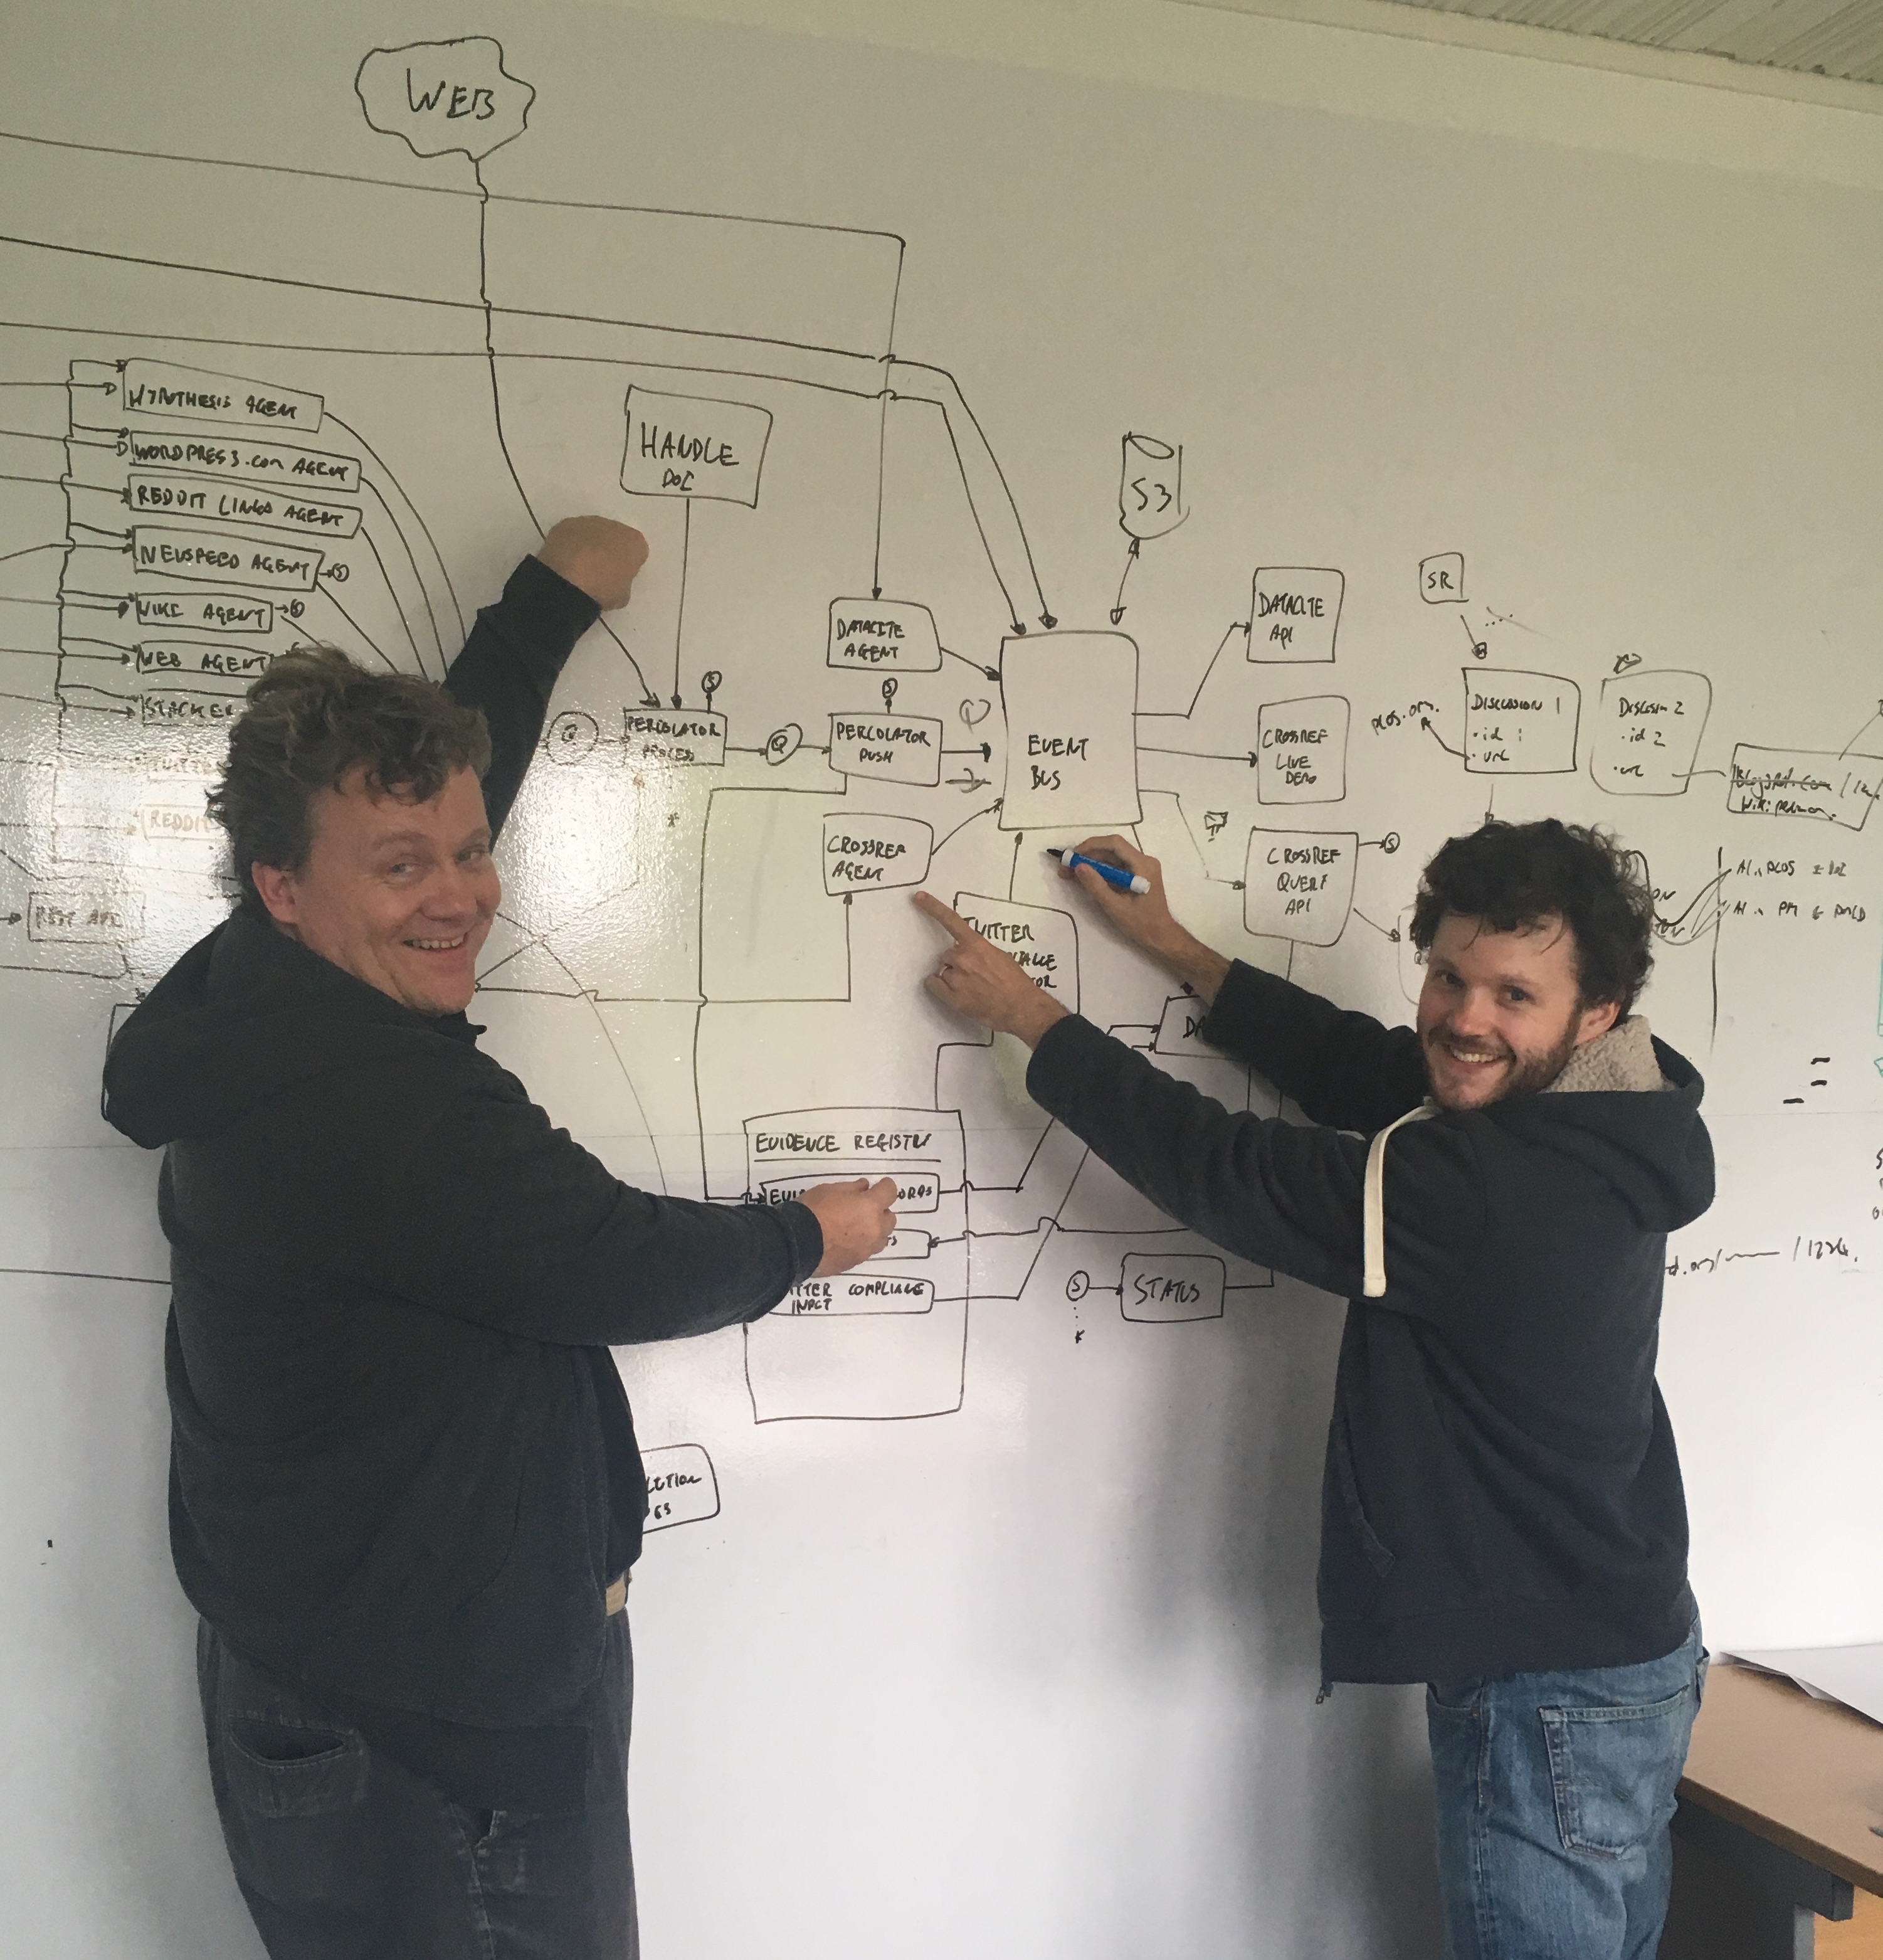 image Martin Fenner and Joe Wass drawing plans on a whiteboard